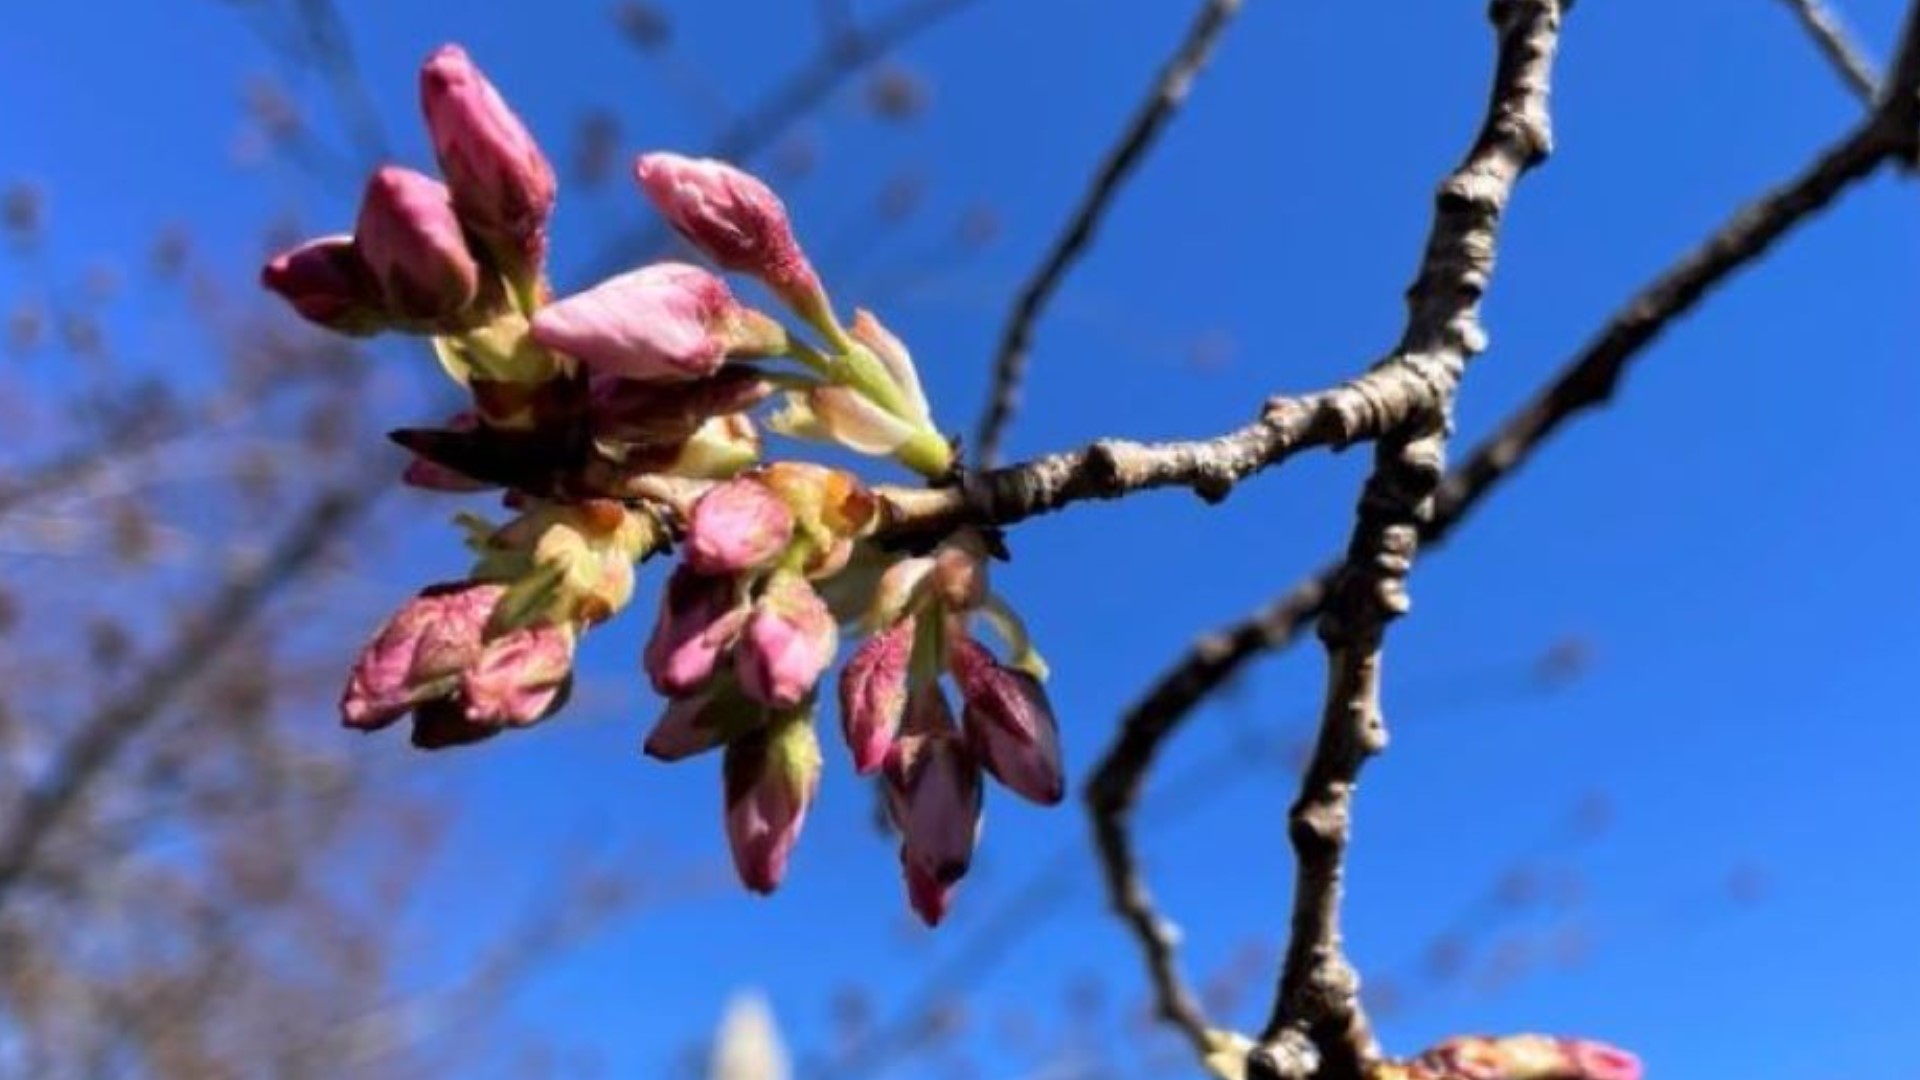 While winds will be gusty early this week, the blossoms are safe, according to Mike Litterst with the National Park Service